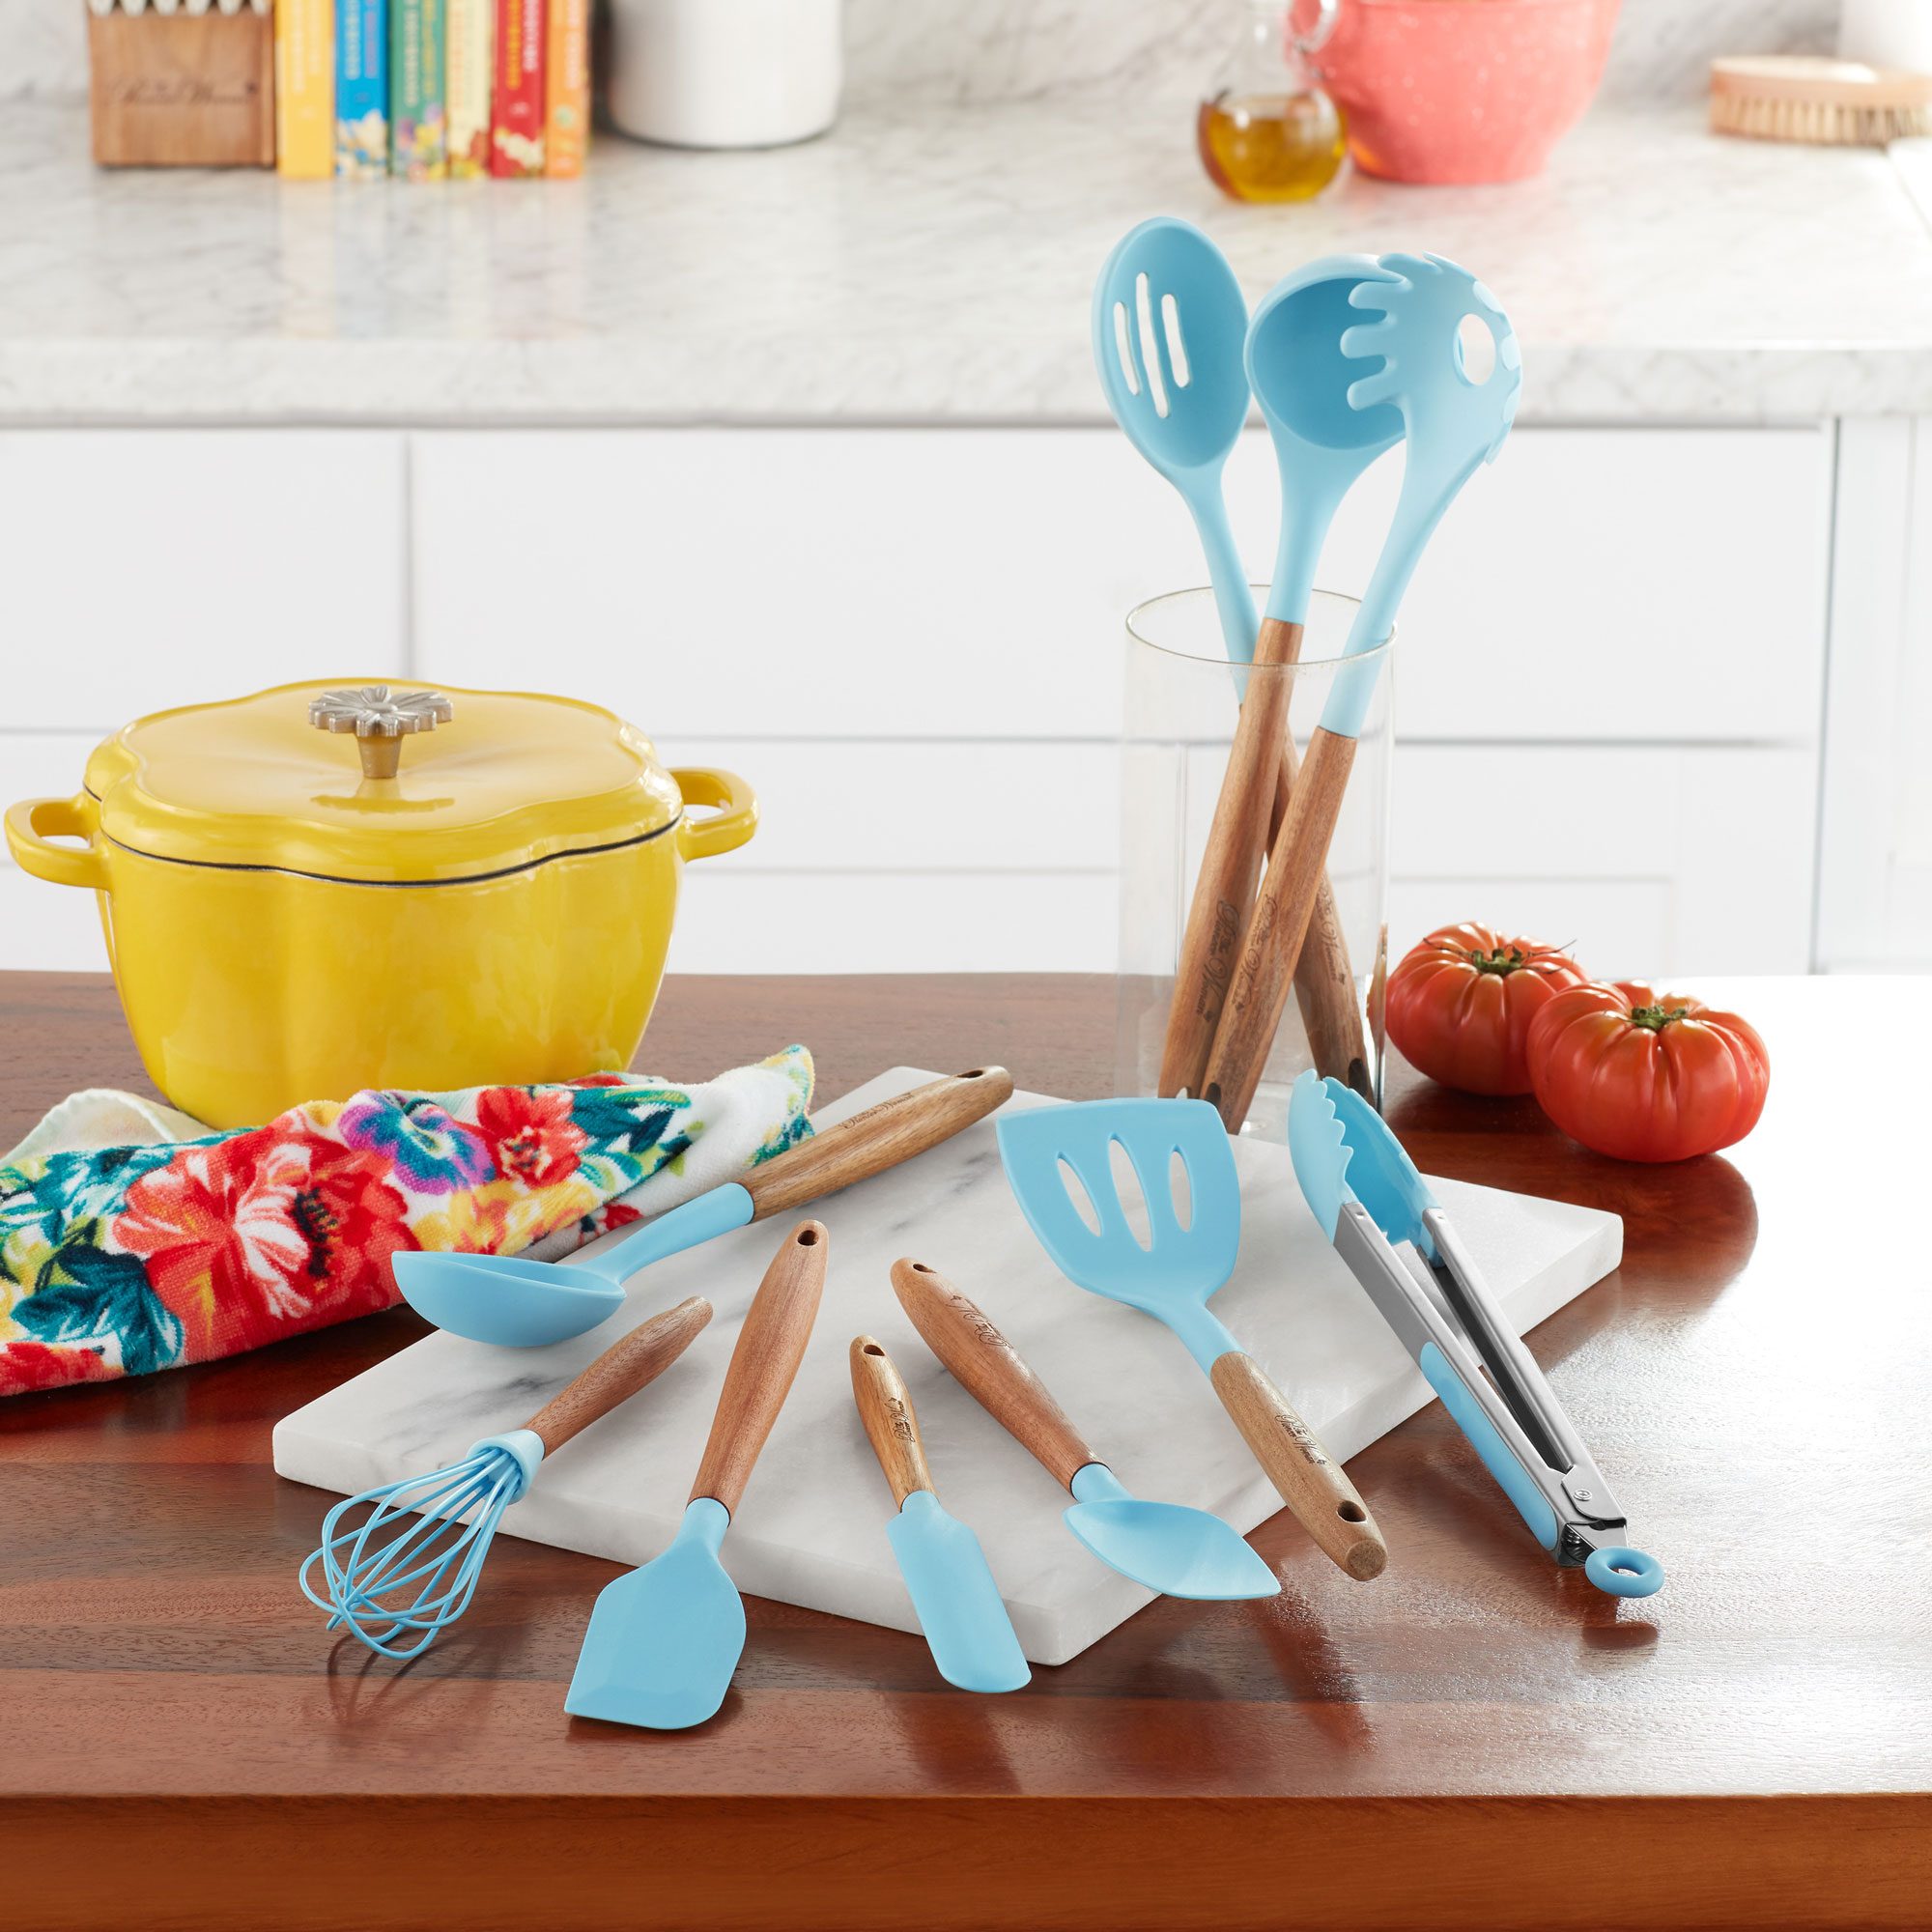 https://www.tasteofhome.com/wp-content/uploads/2022/12/The-Pioneer-Woman-10-Piece-Silicone-and-Acacia-Wood-Handle-Cooking-Utensils-Set-Blue_ecomm_via-walmart.com-FT.jpg?fit=700%2C1024